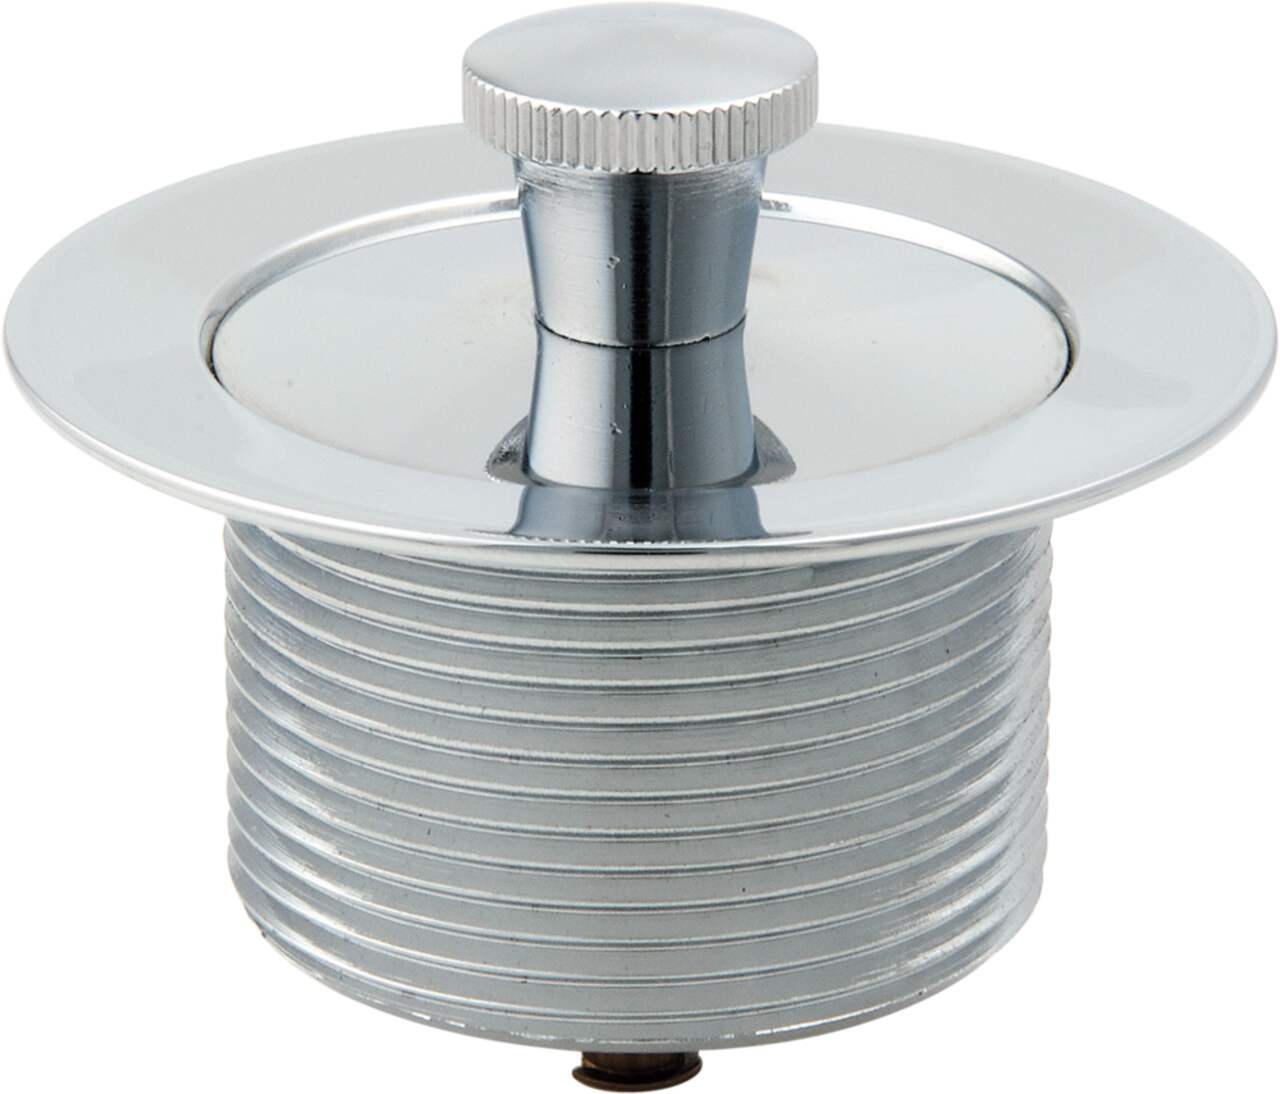 PlumbShop Lift-n-Lock Bathtub Drain, Fits Tubs with 1-7/8 to 2-1/4-in  Opening, Chrome